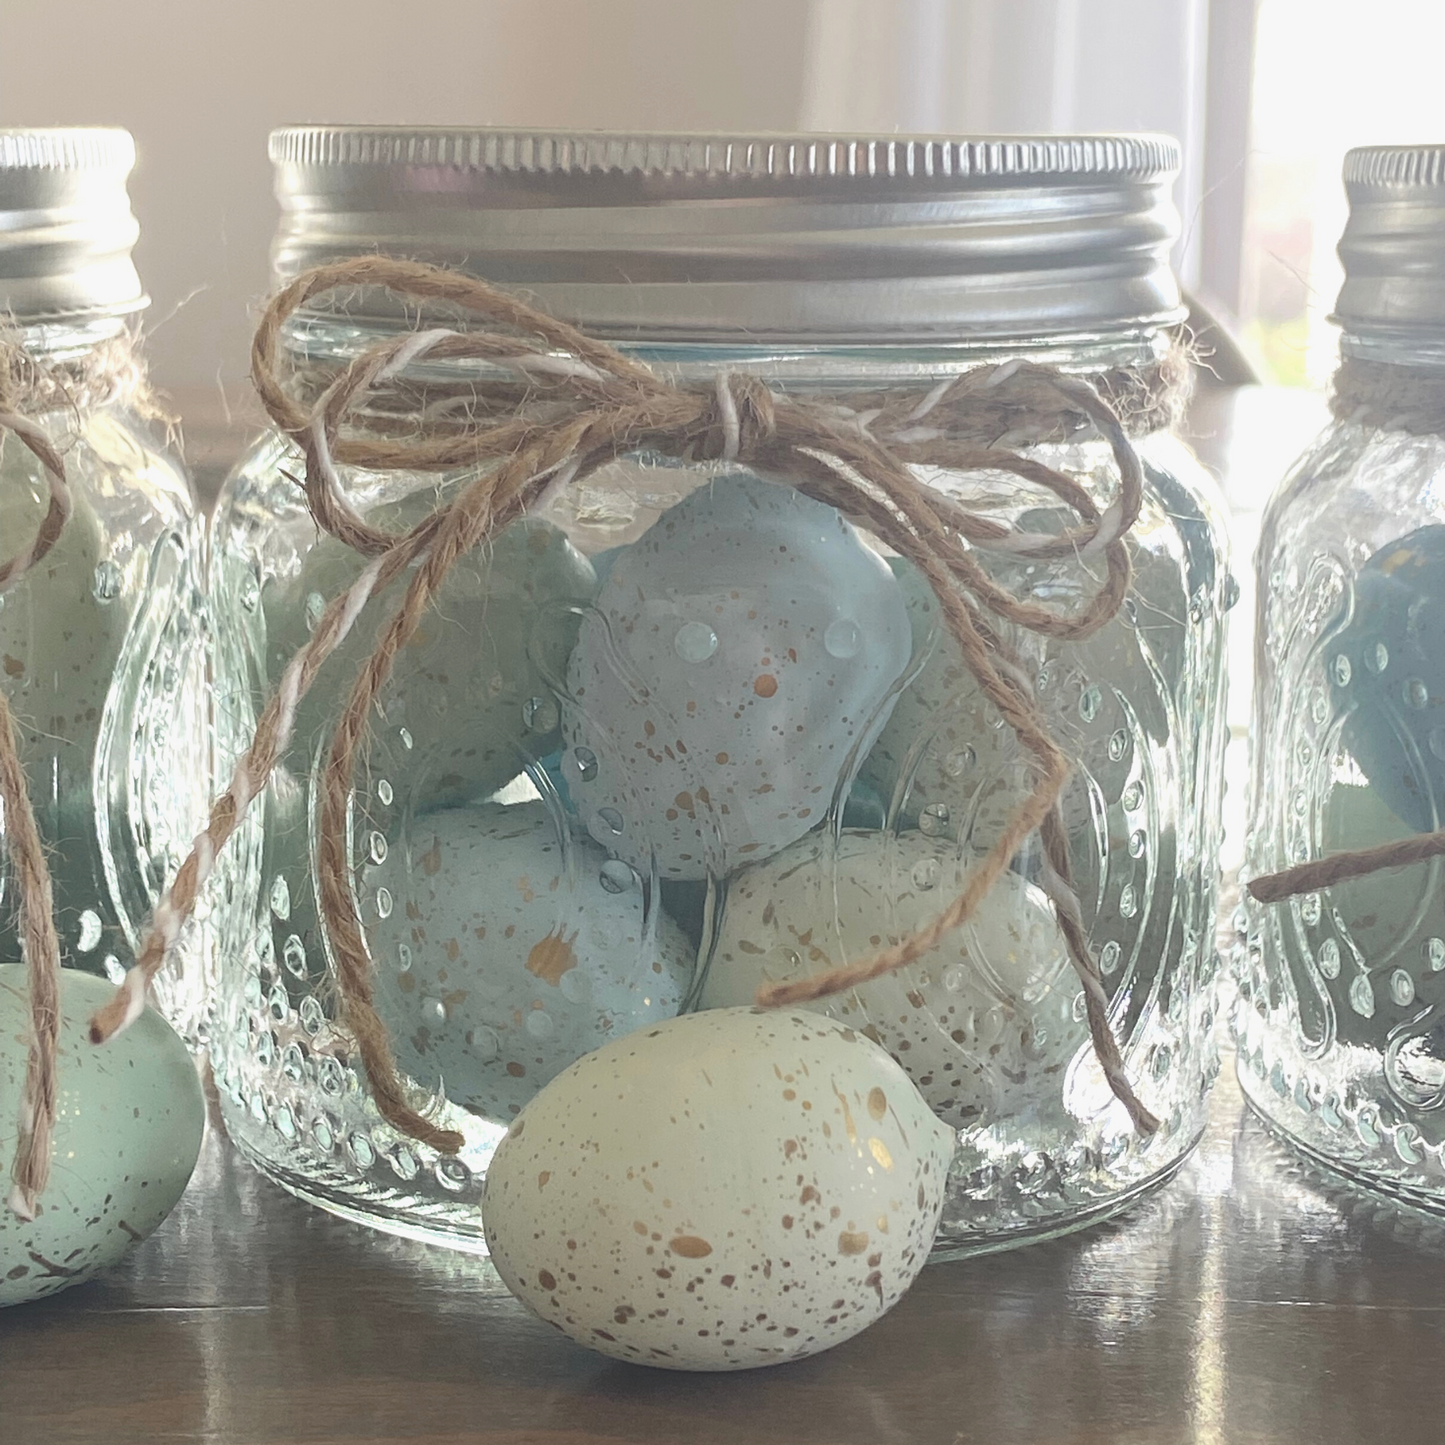 Speckled Blue & Green Bird Eggs Vintage Inspired Glass Container for Summer Decor